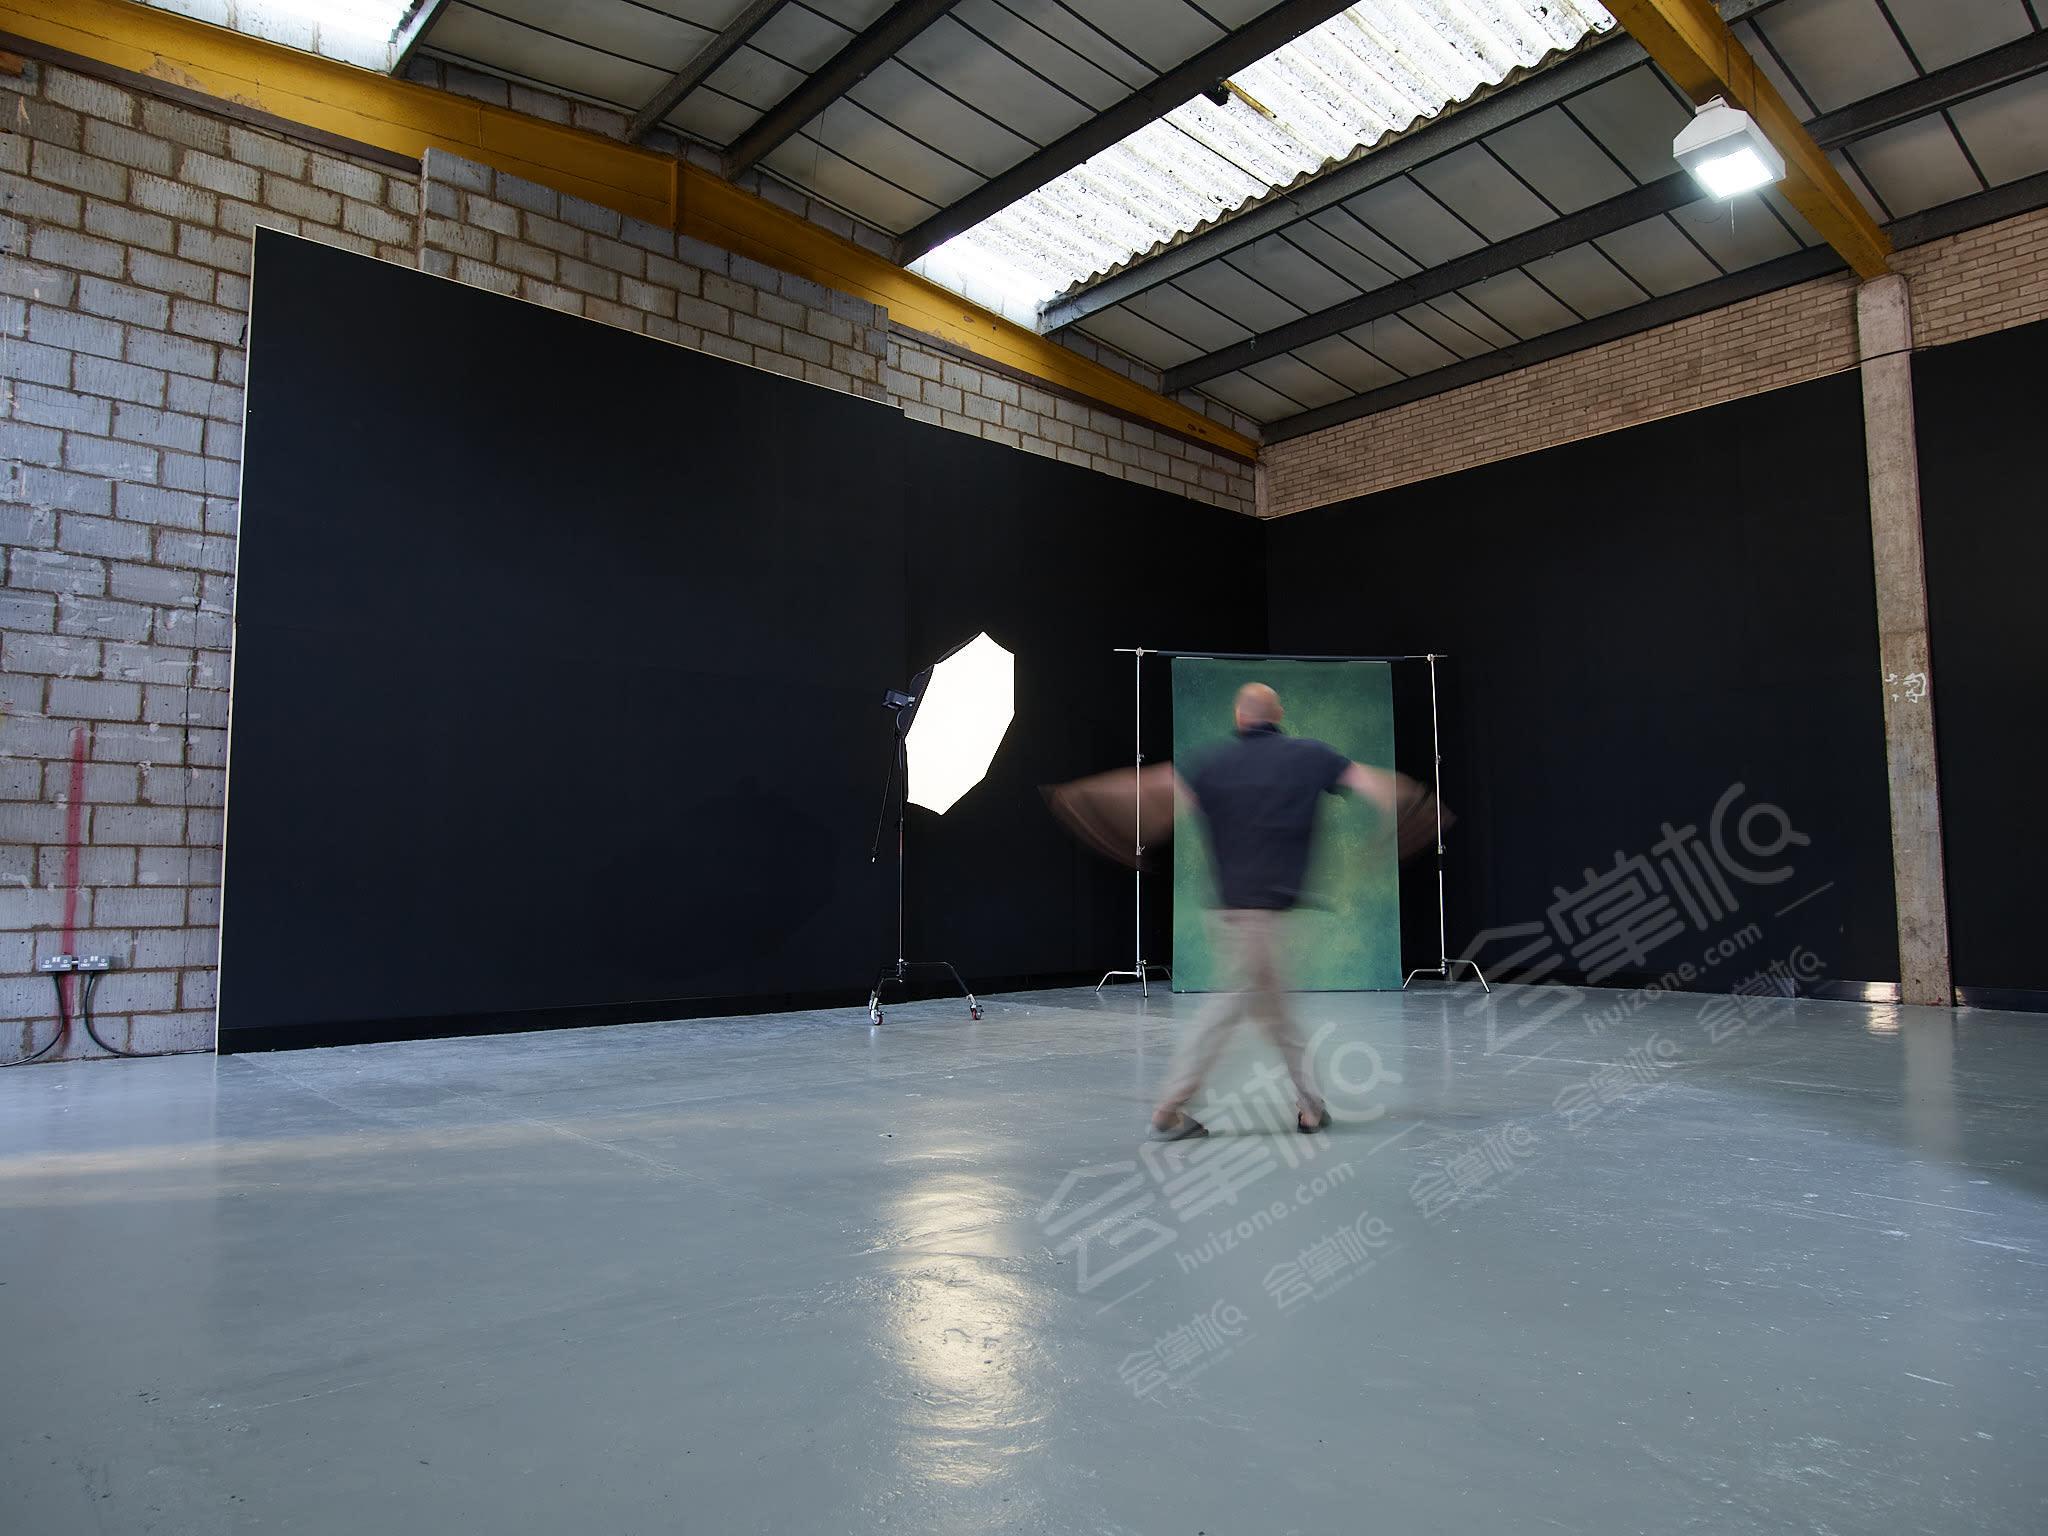 City Based Film & Photography Studio / Warehouse / Makerspace